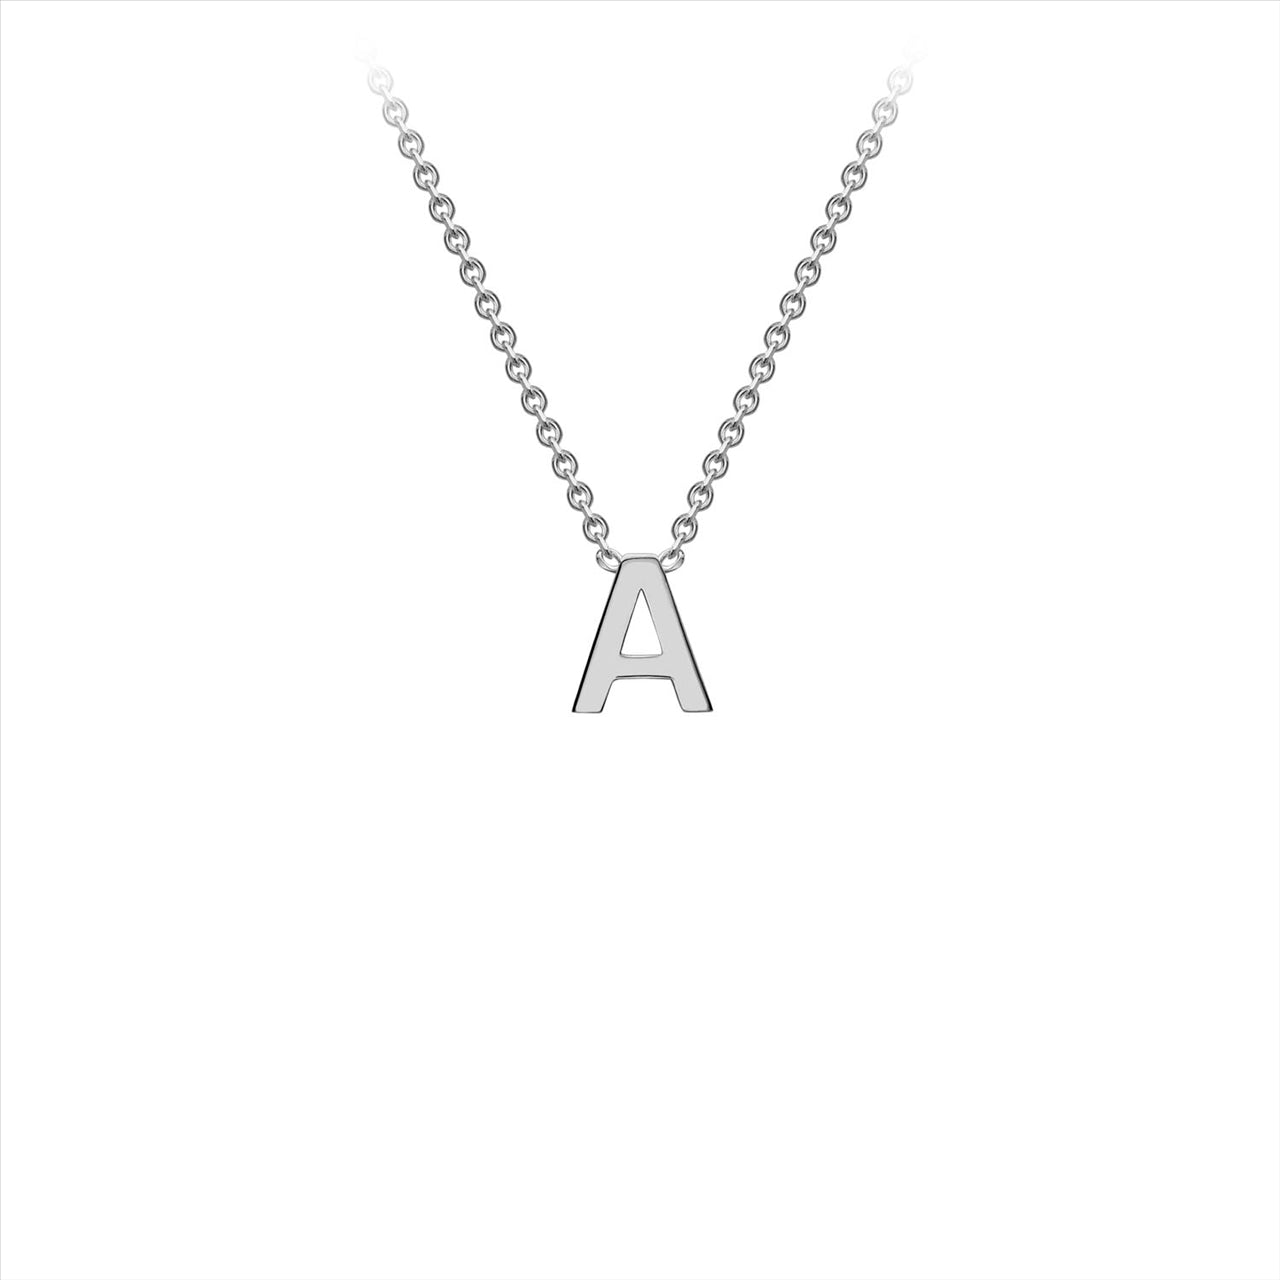 9K White Gold 'A' Initial Adjustable Letter Necklace 38/43cm